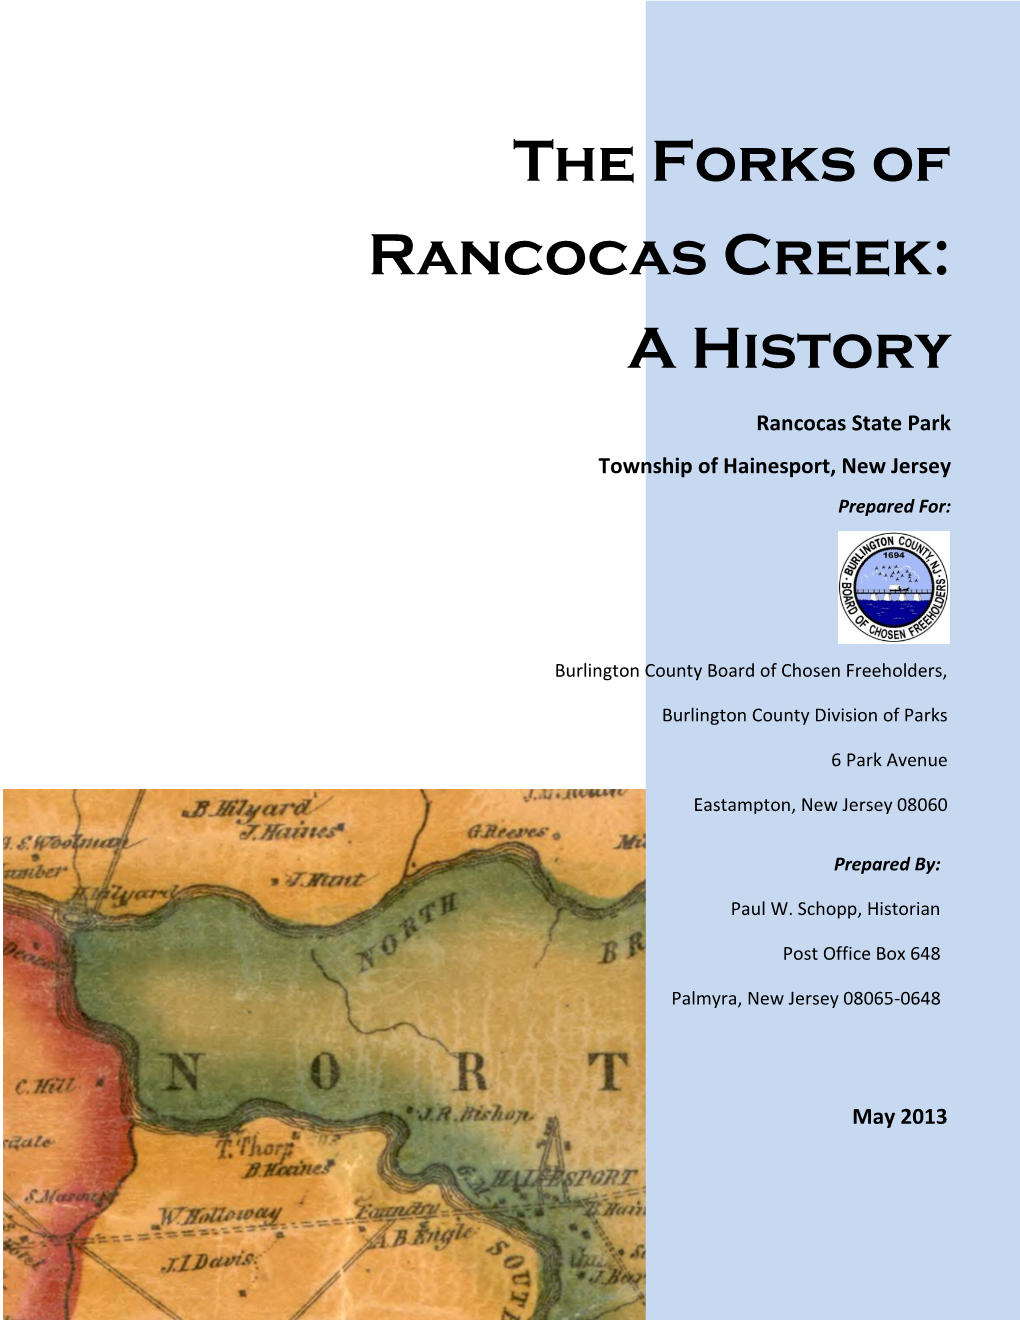 The Forks of Rancocas Creek: a History